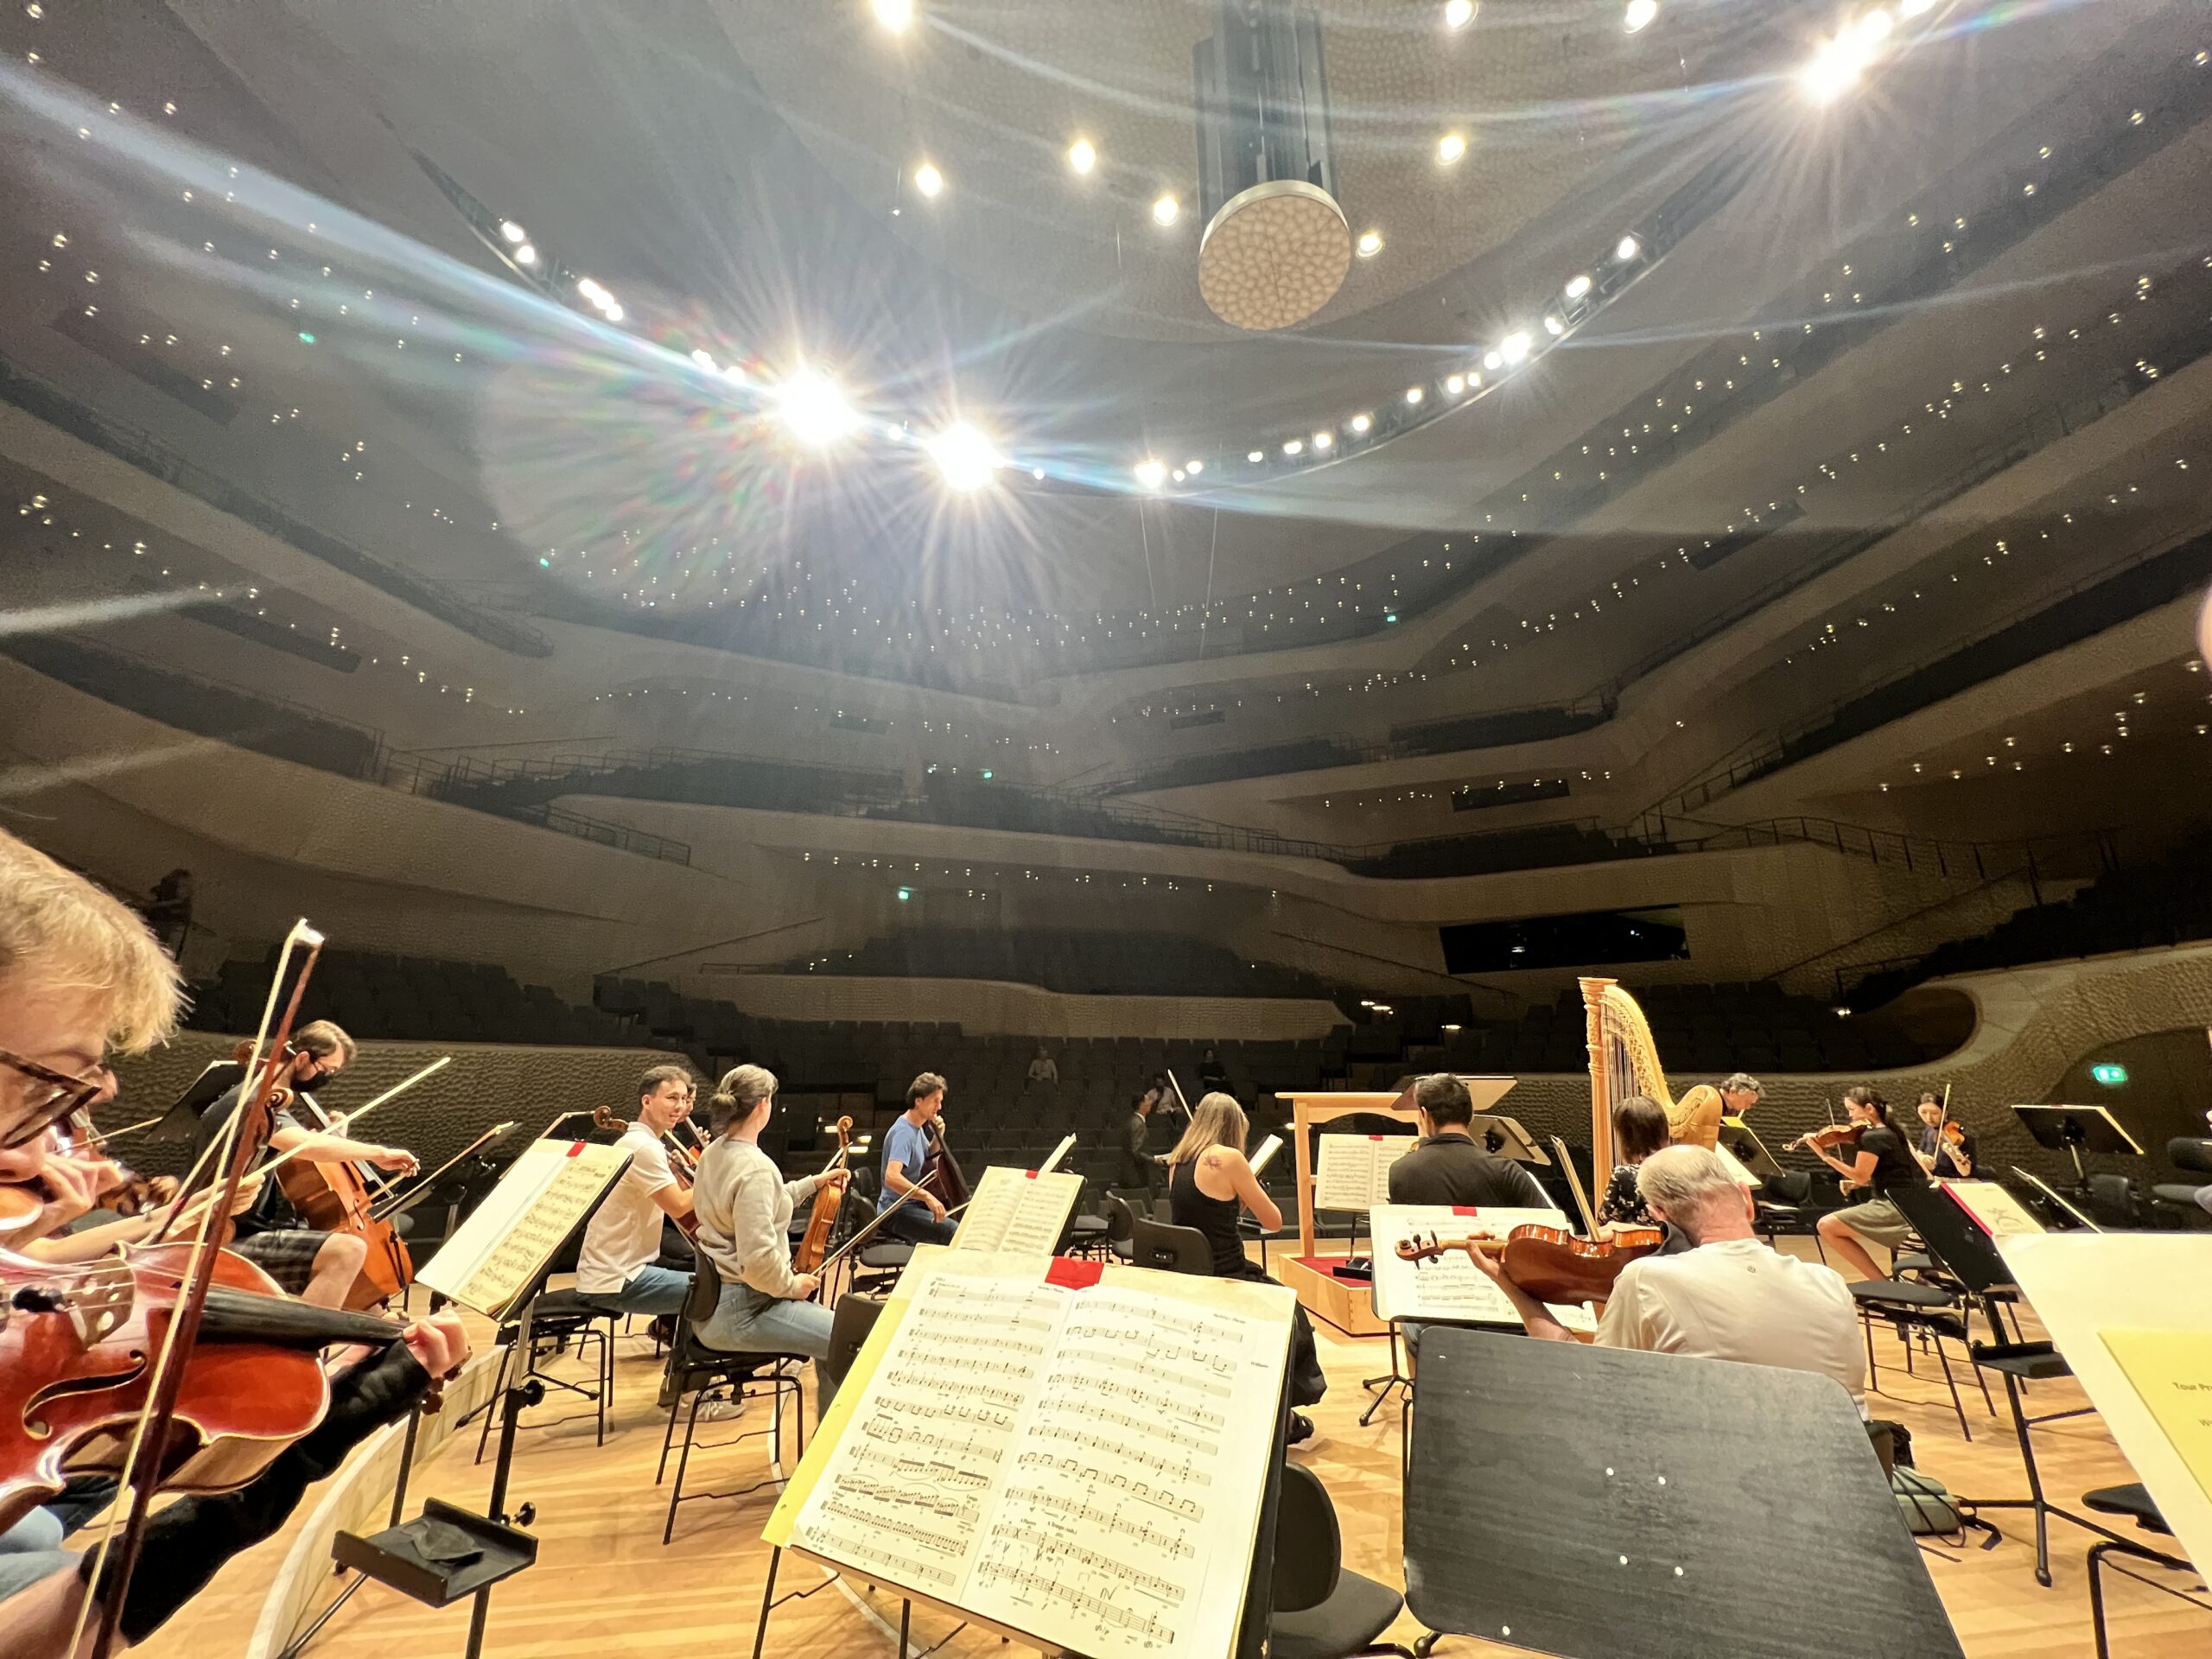 Lisa rehearses with the BSO at Berlin Philharmonie Concert Hall